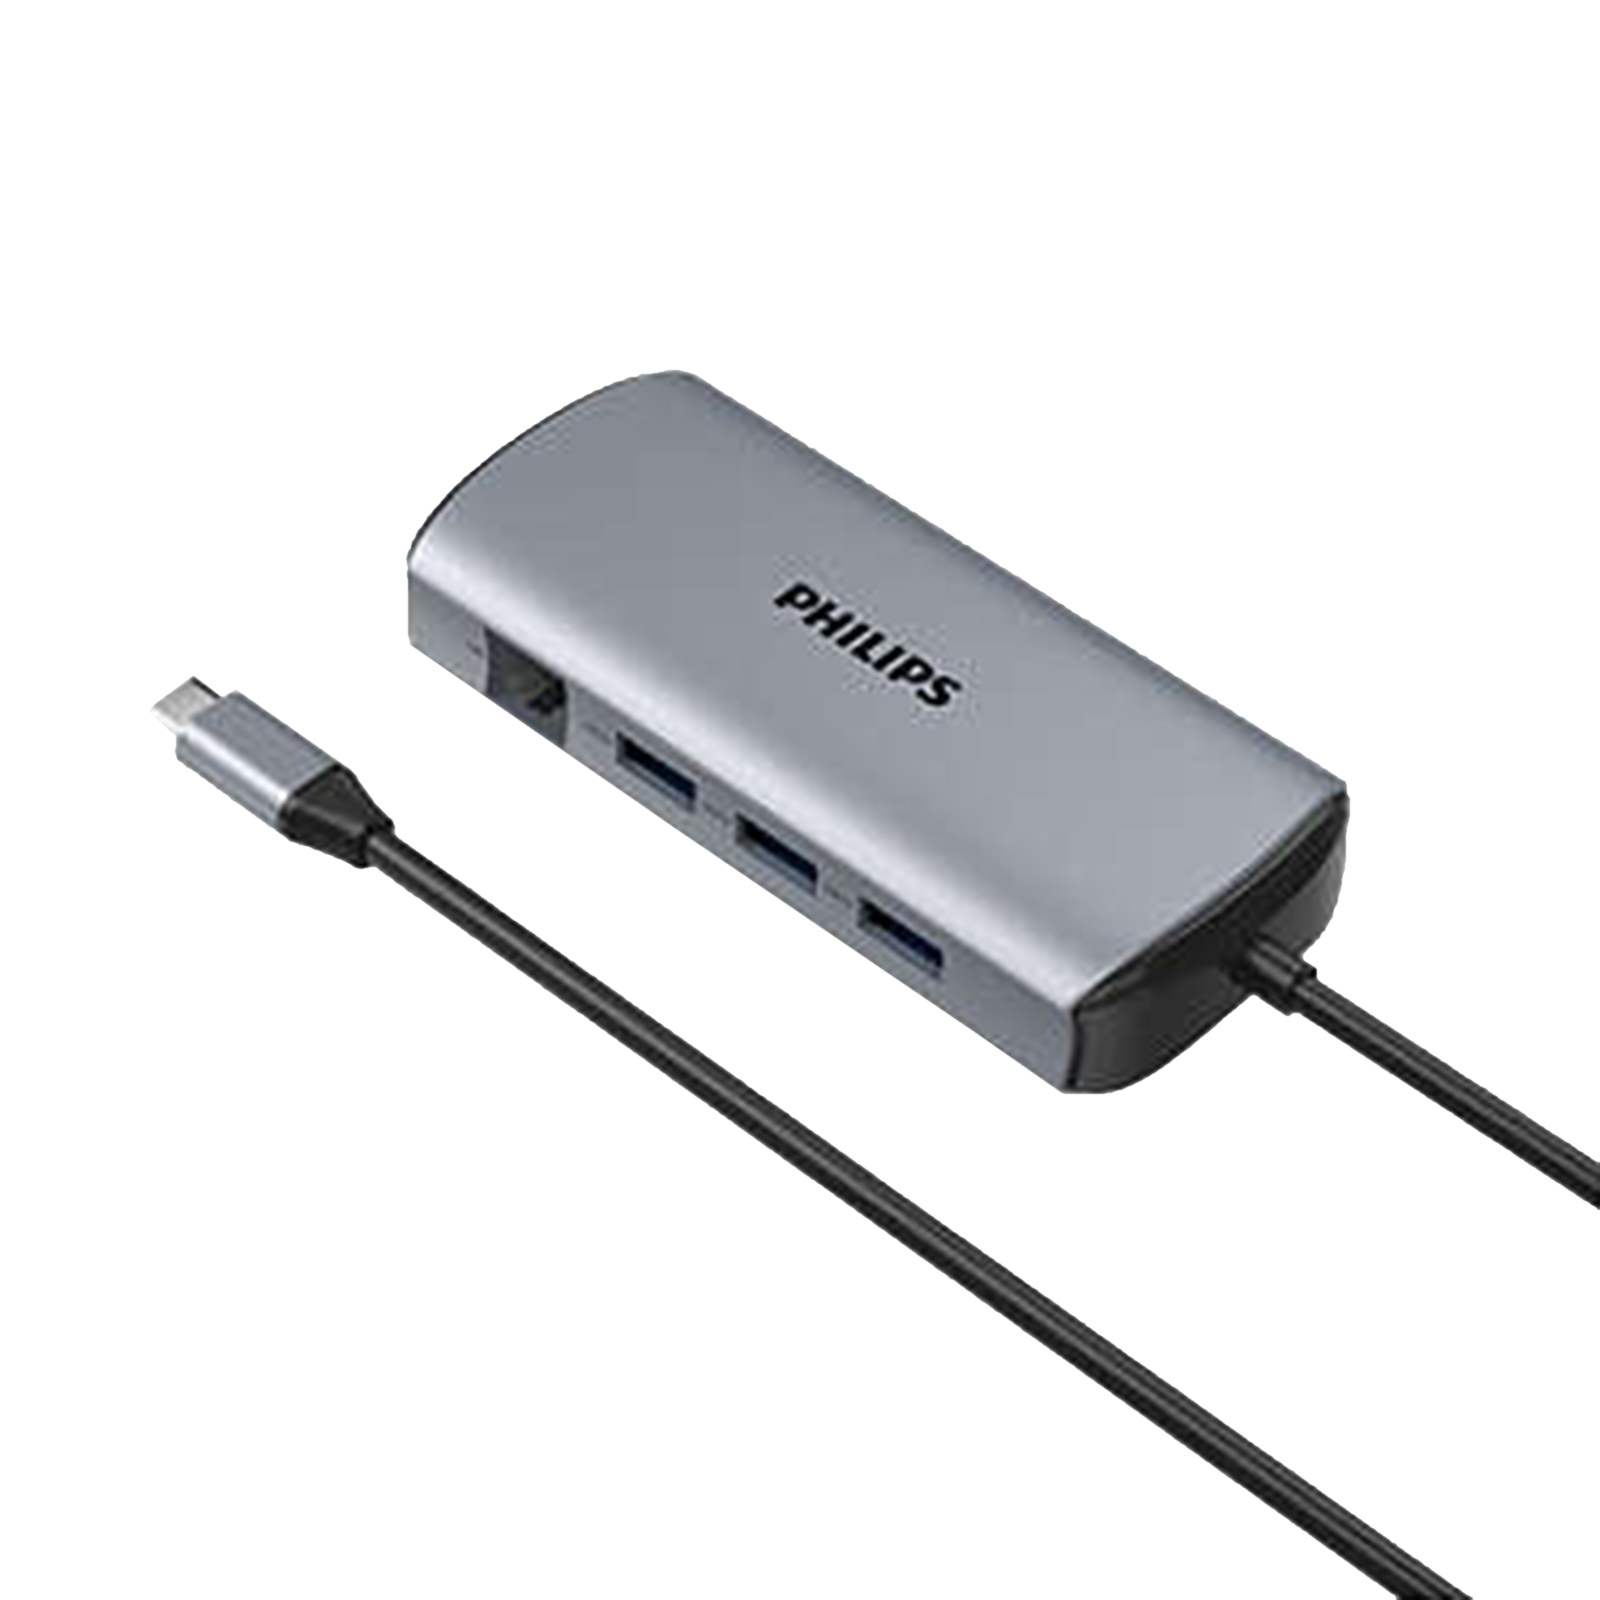 Philips 7-in-1 USB 3.0 Type C to USB 3.0 Type A, USB Type C, SD Card Slot, TF Card Reader, HDMI Type A USB Hub (5 Gbps Data Transfer Rate, Grey)